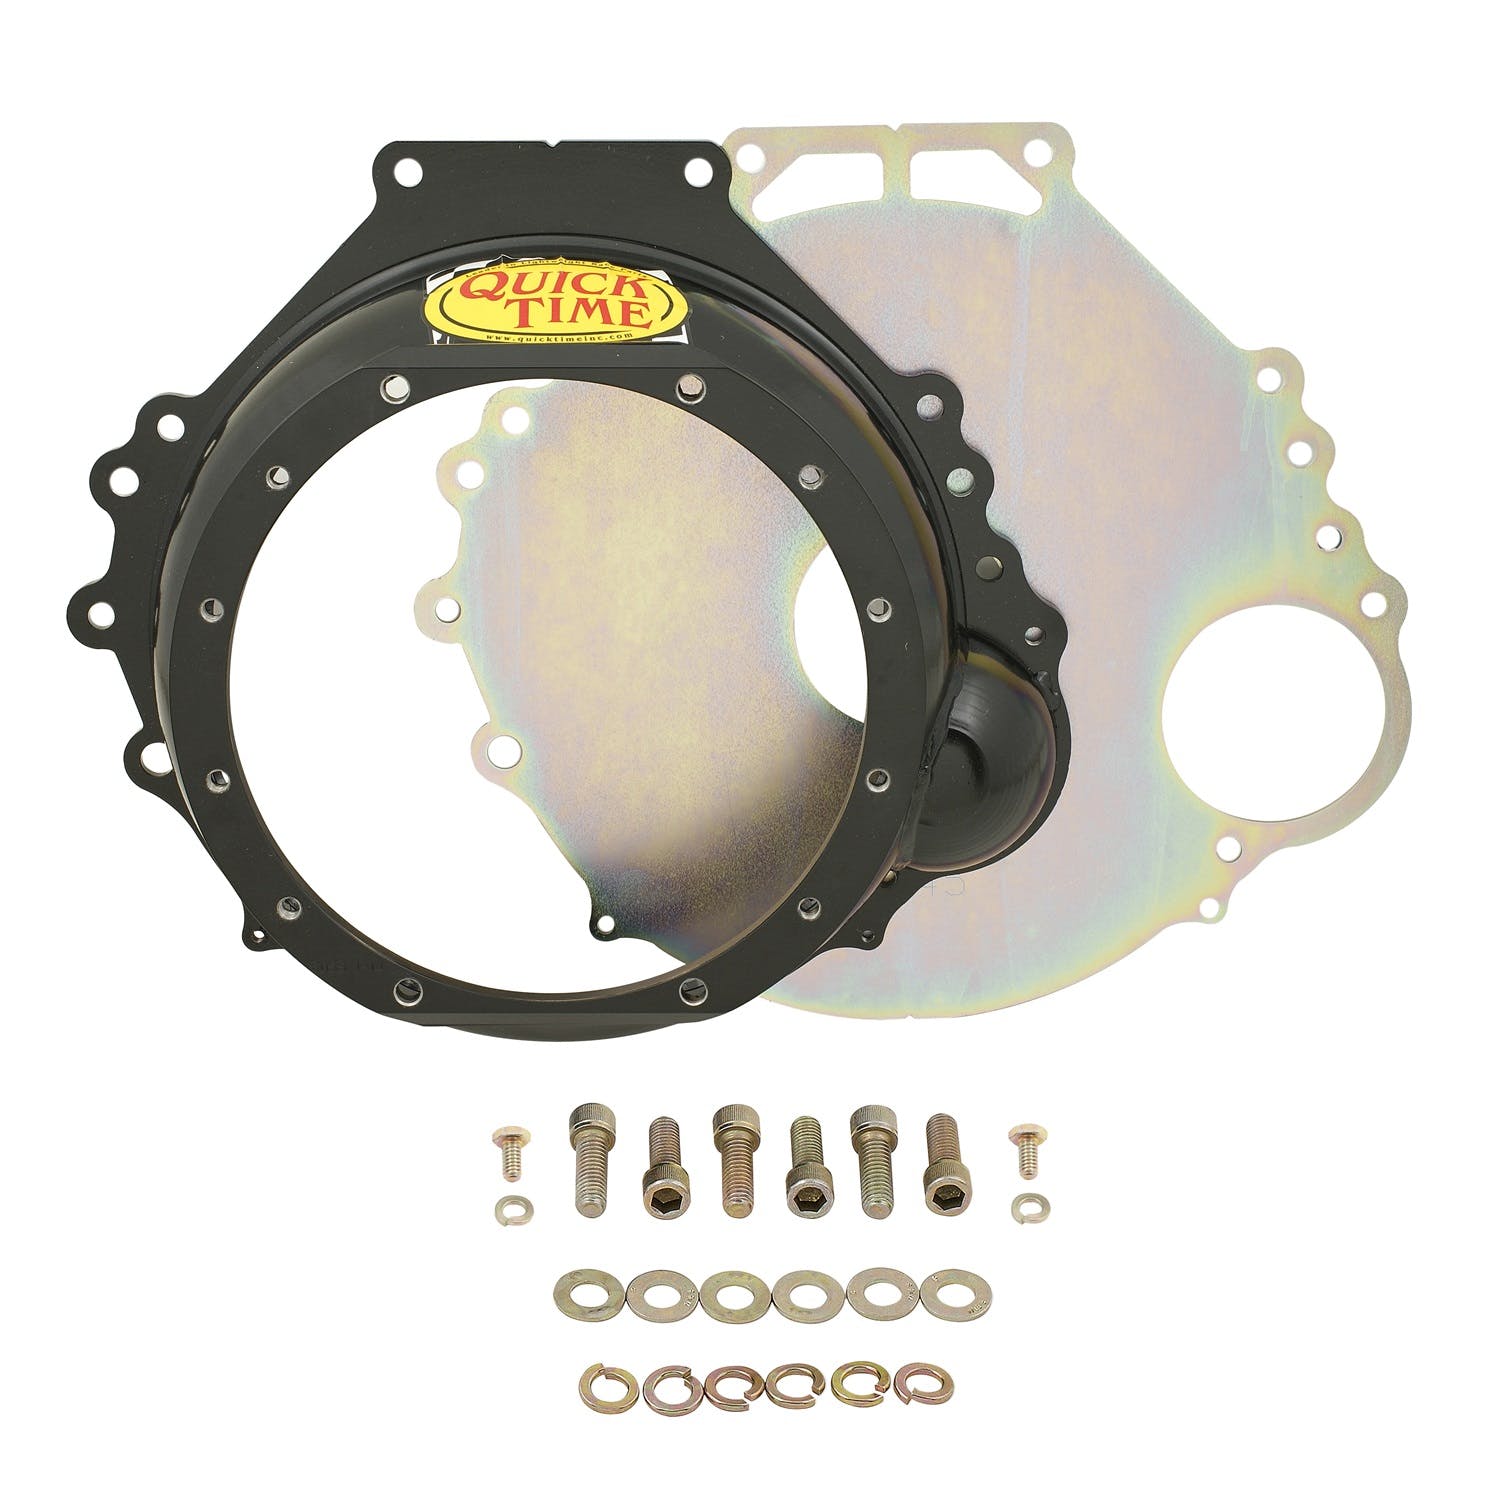 QuickTime RM-6055 Ford 5.0/5.8 to ZF Transaxle